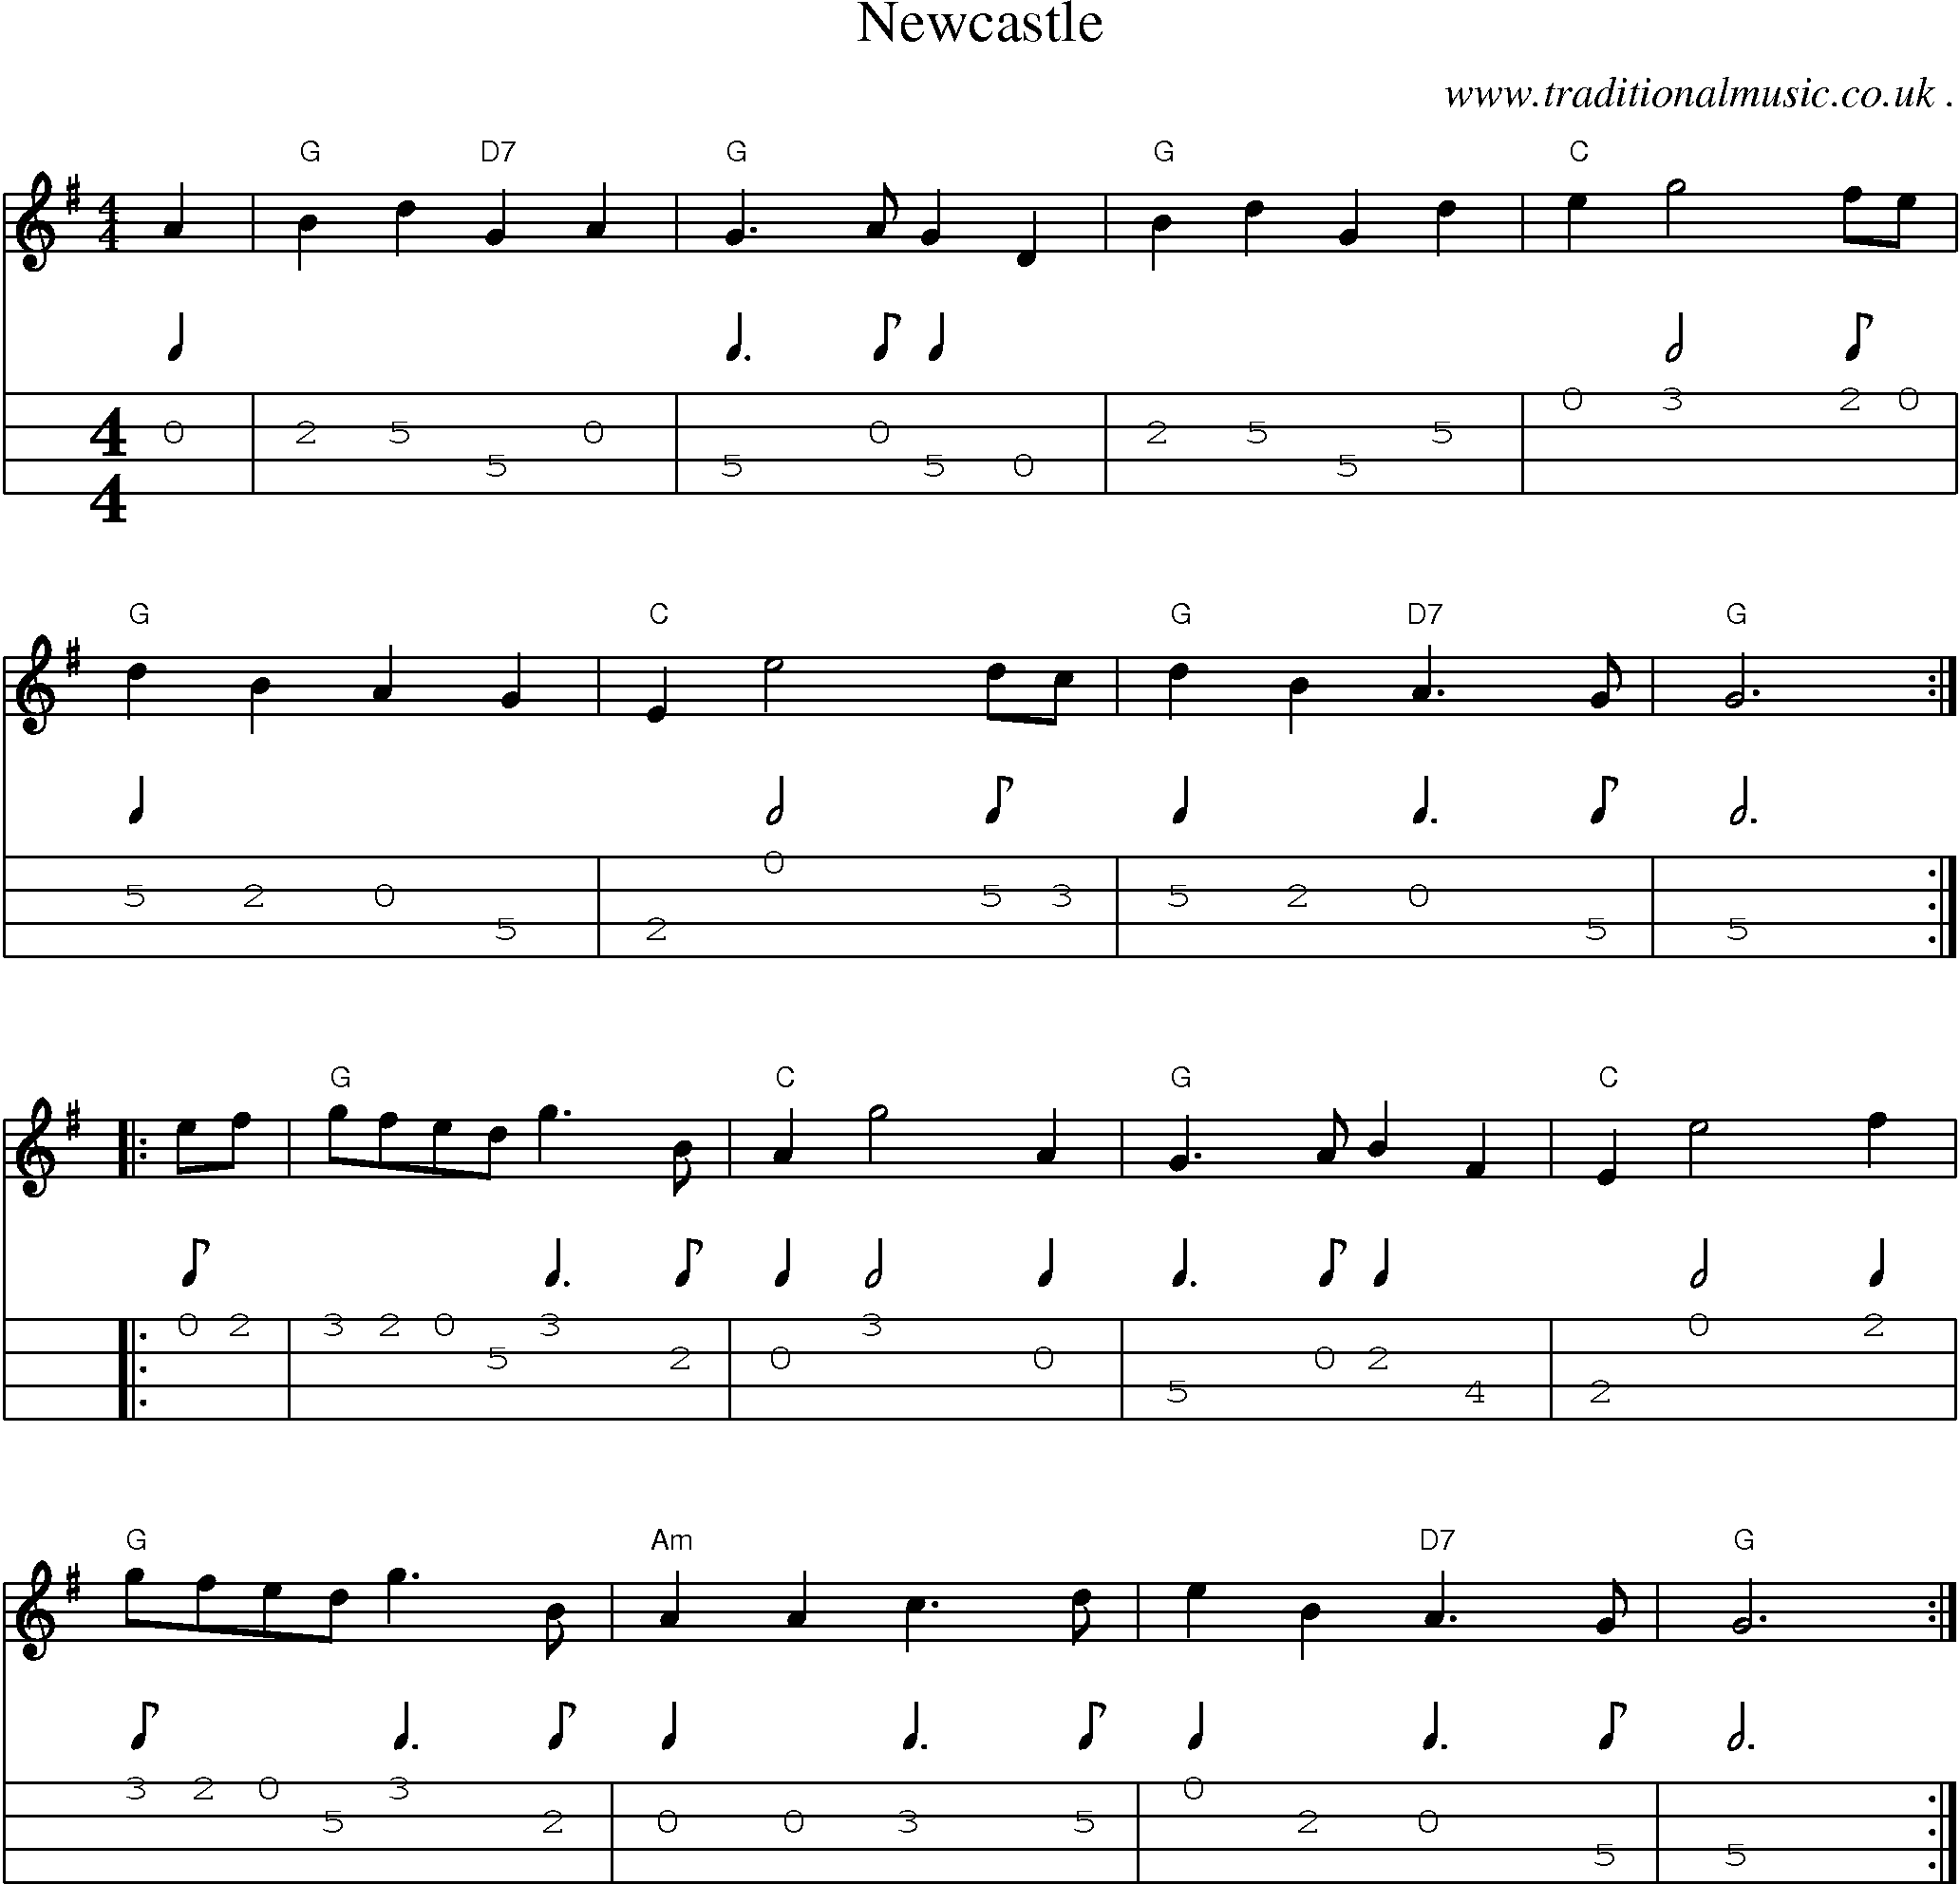 Music Score and Guitar Tabs for Newcastle